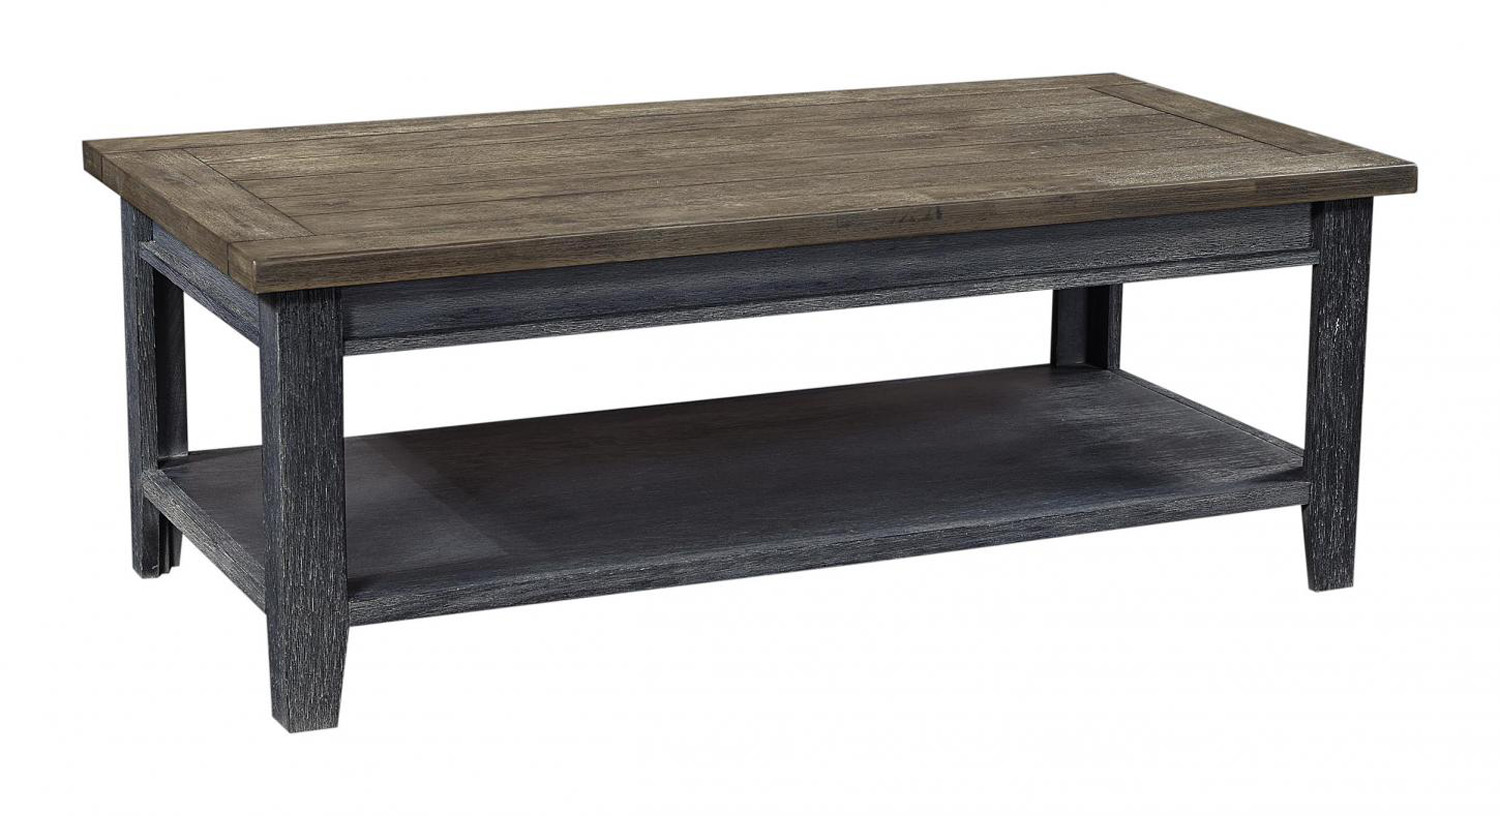 Eastport Cocktail Table in the Drifted Black finish